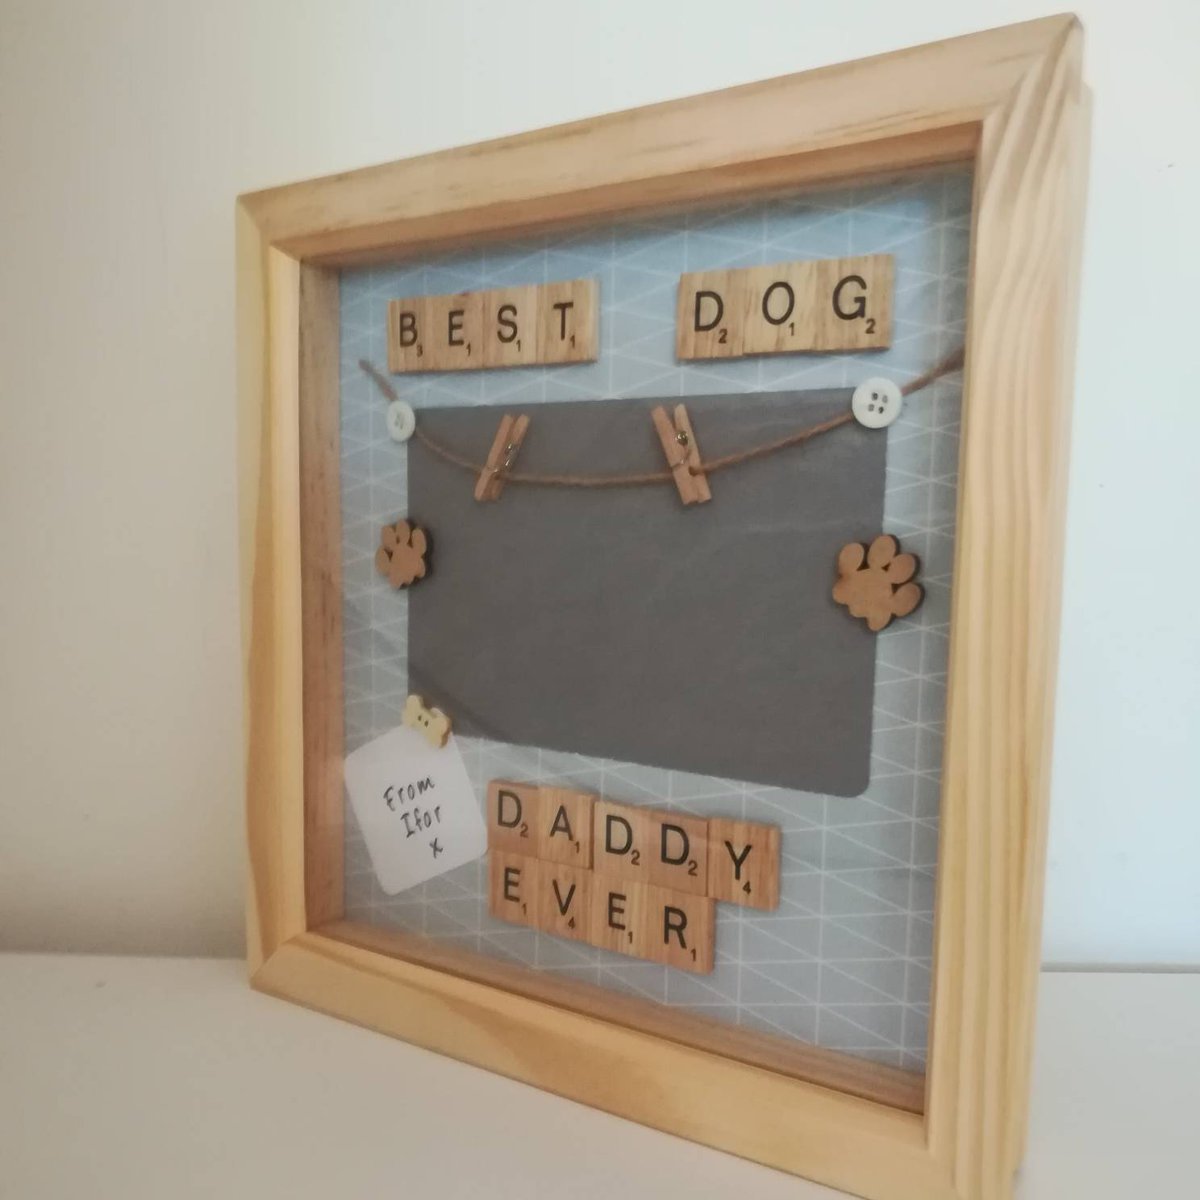 Father's Day gift of a different type from your fur babies #dogdaddy #doglover #fromthedog #handmadegifts #giftideas